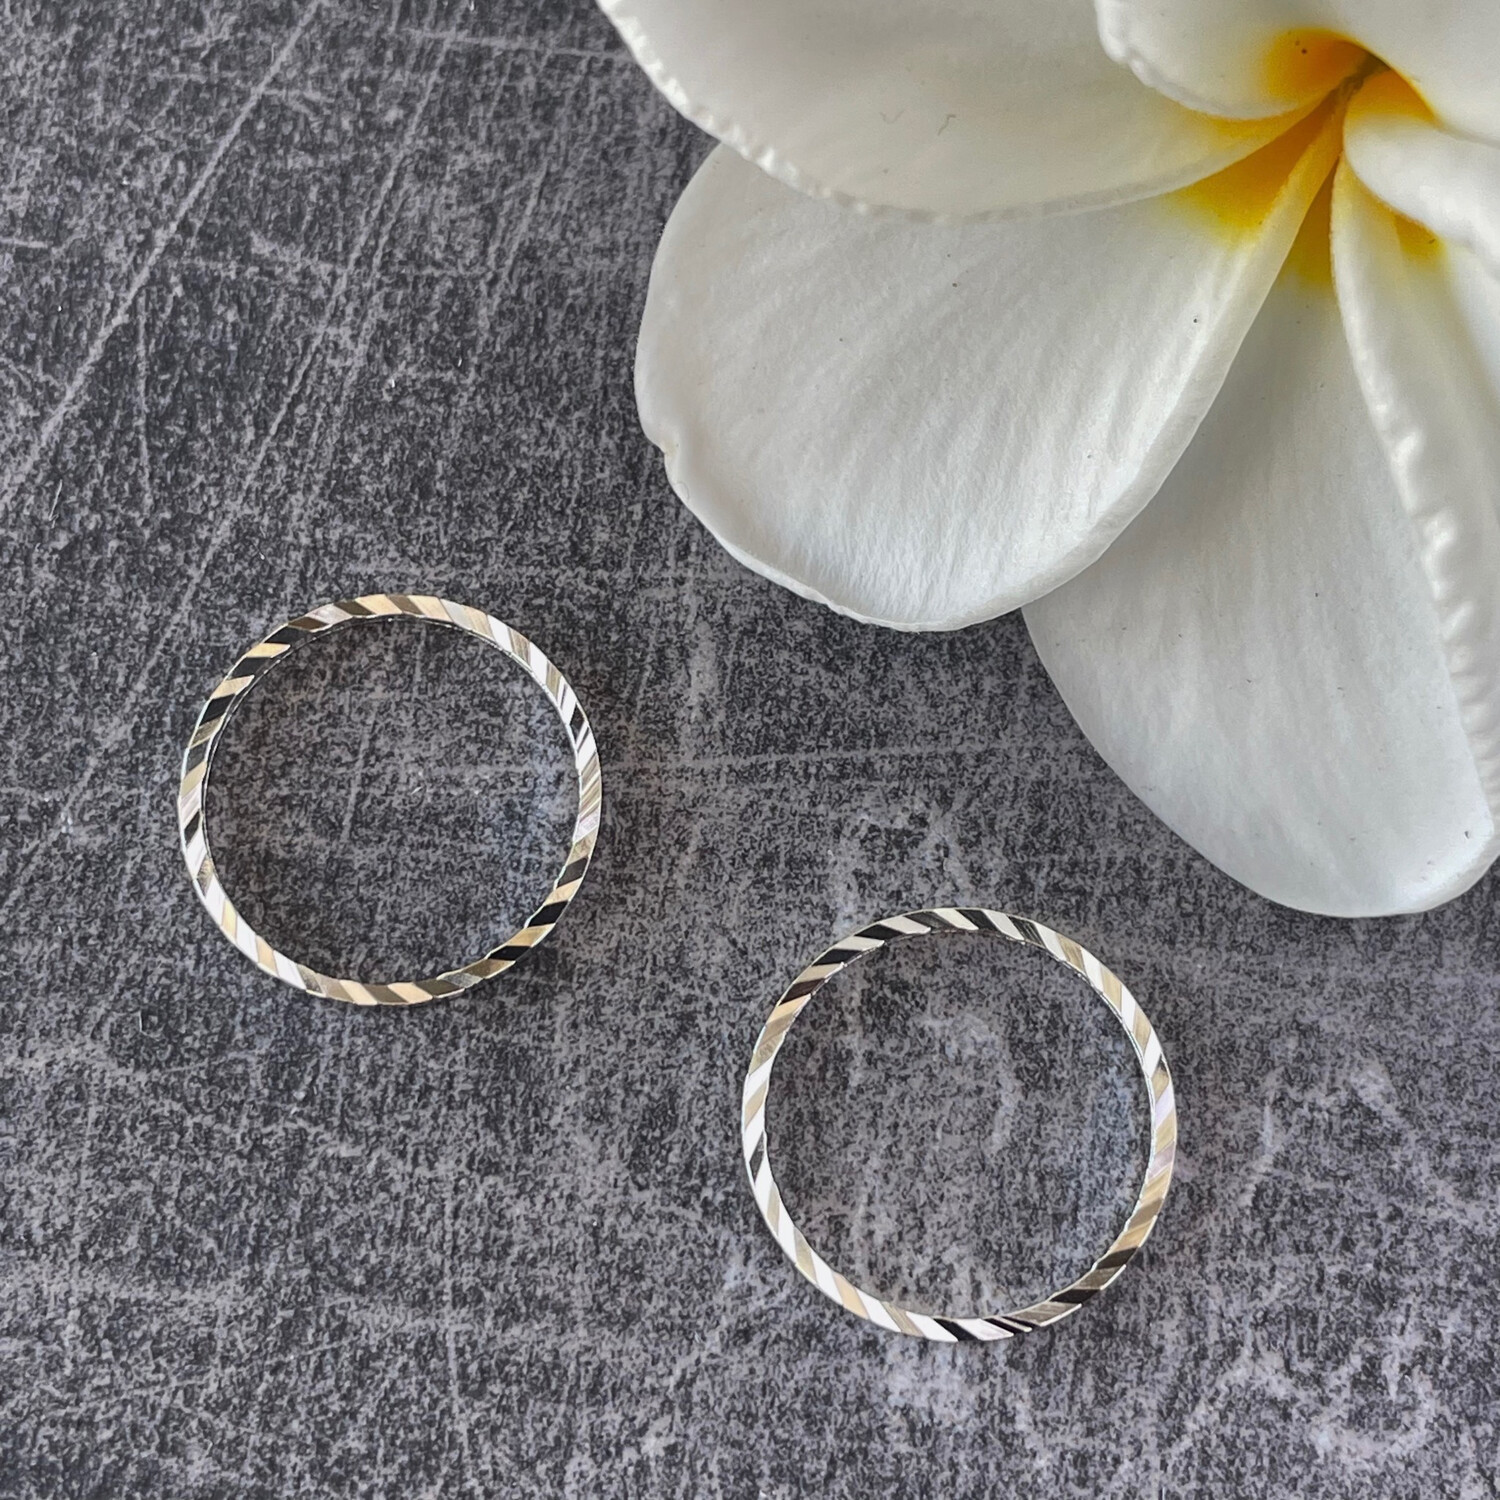 Silver-Plated Brass Component for Jewelry Making - 16mm single-sided diamond-cut round hoop, 1mm thick. Sold per package of 10 pieces.